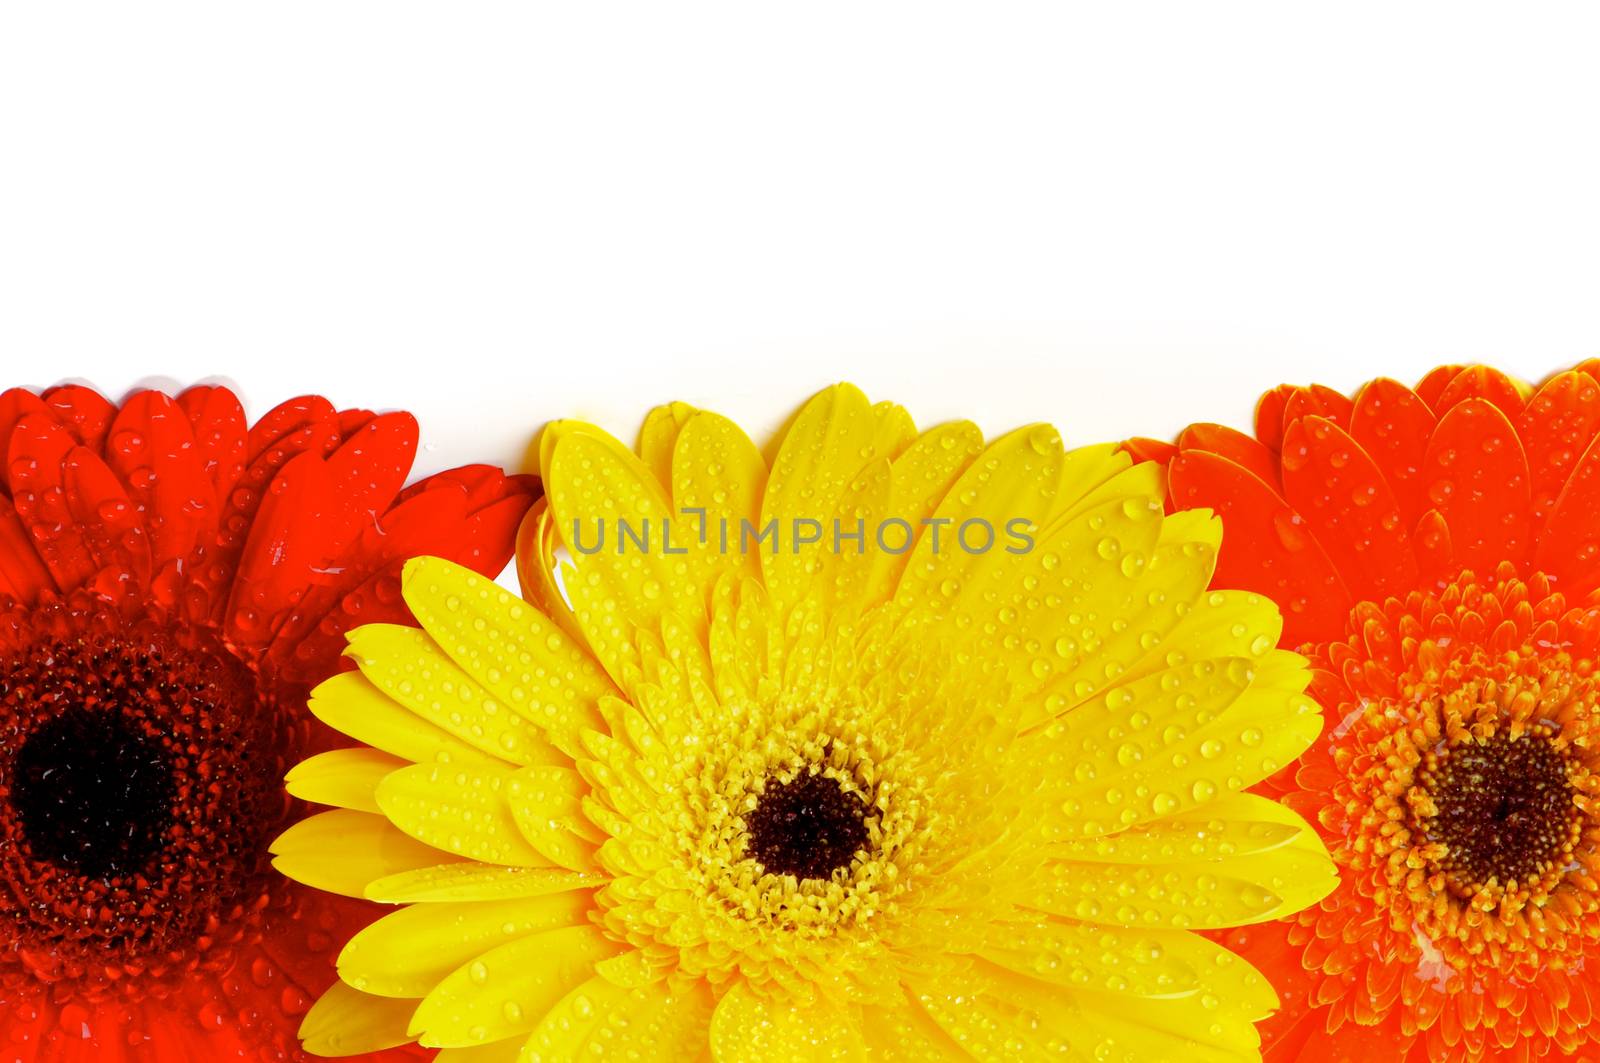 Horizontal Frame of Red, Orange and Yellow Gerbera Daisy with Water Droplets isolated on White background